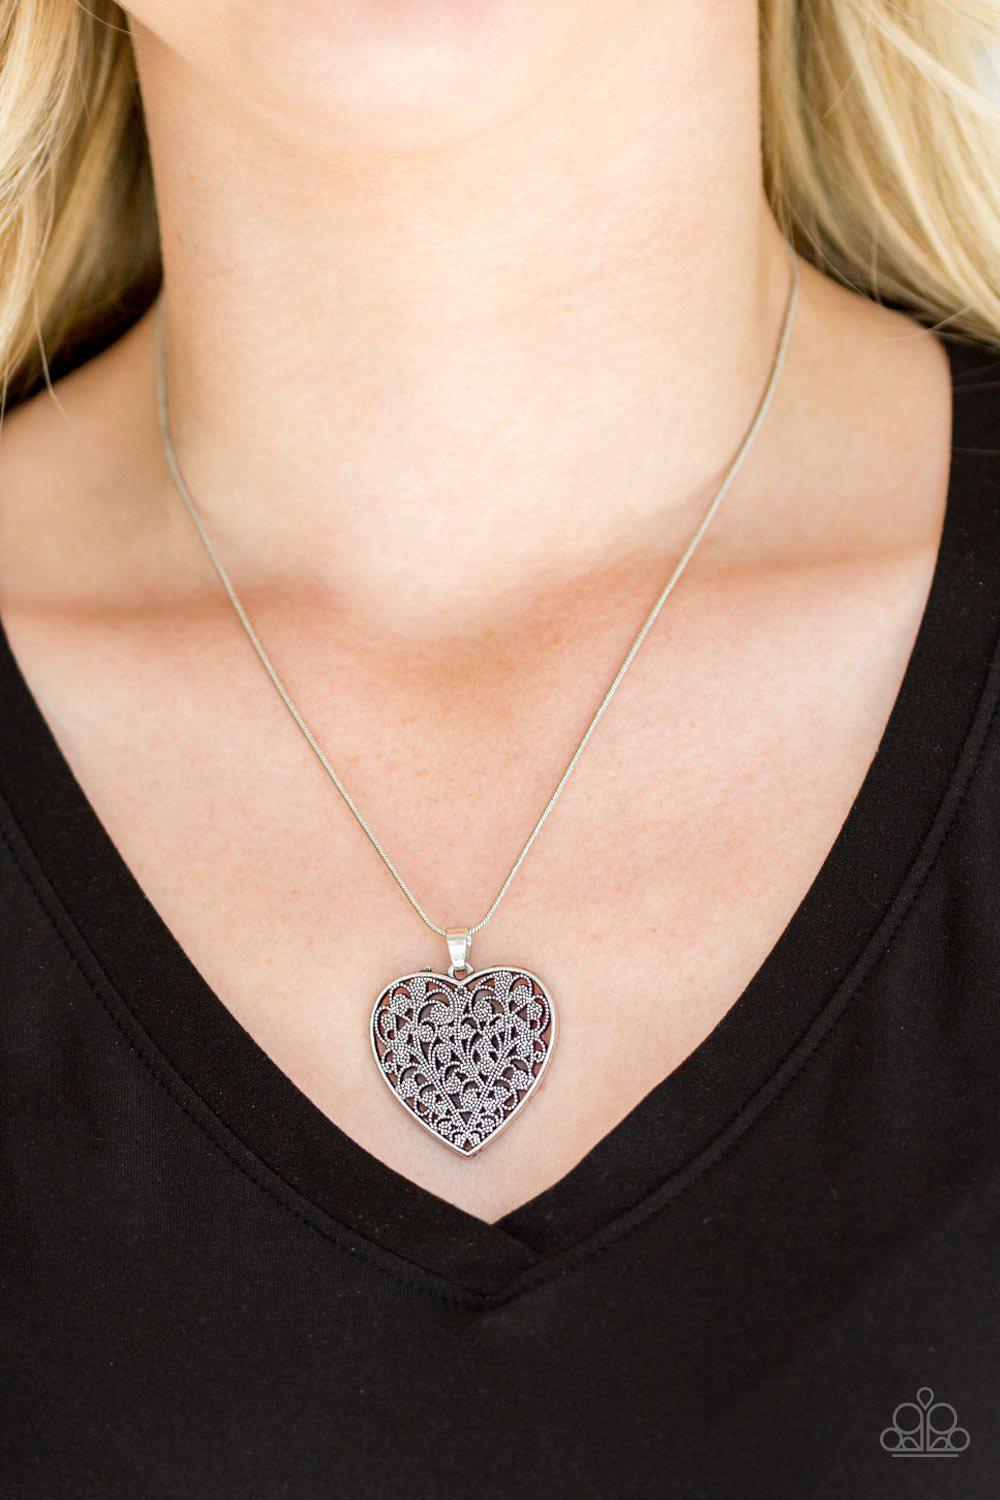 Look Into Your Heart Silver Filigree Heart Necklace - Paparazzi Accessories - model -CarasShop.com - $5 Jewelry by Cara Jewels